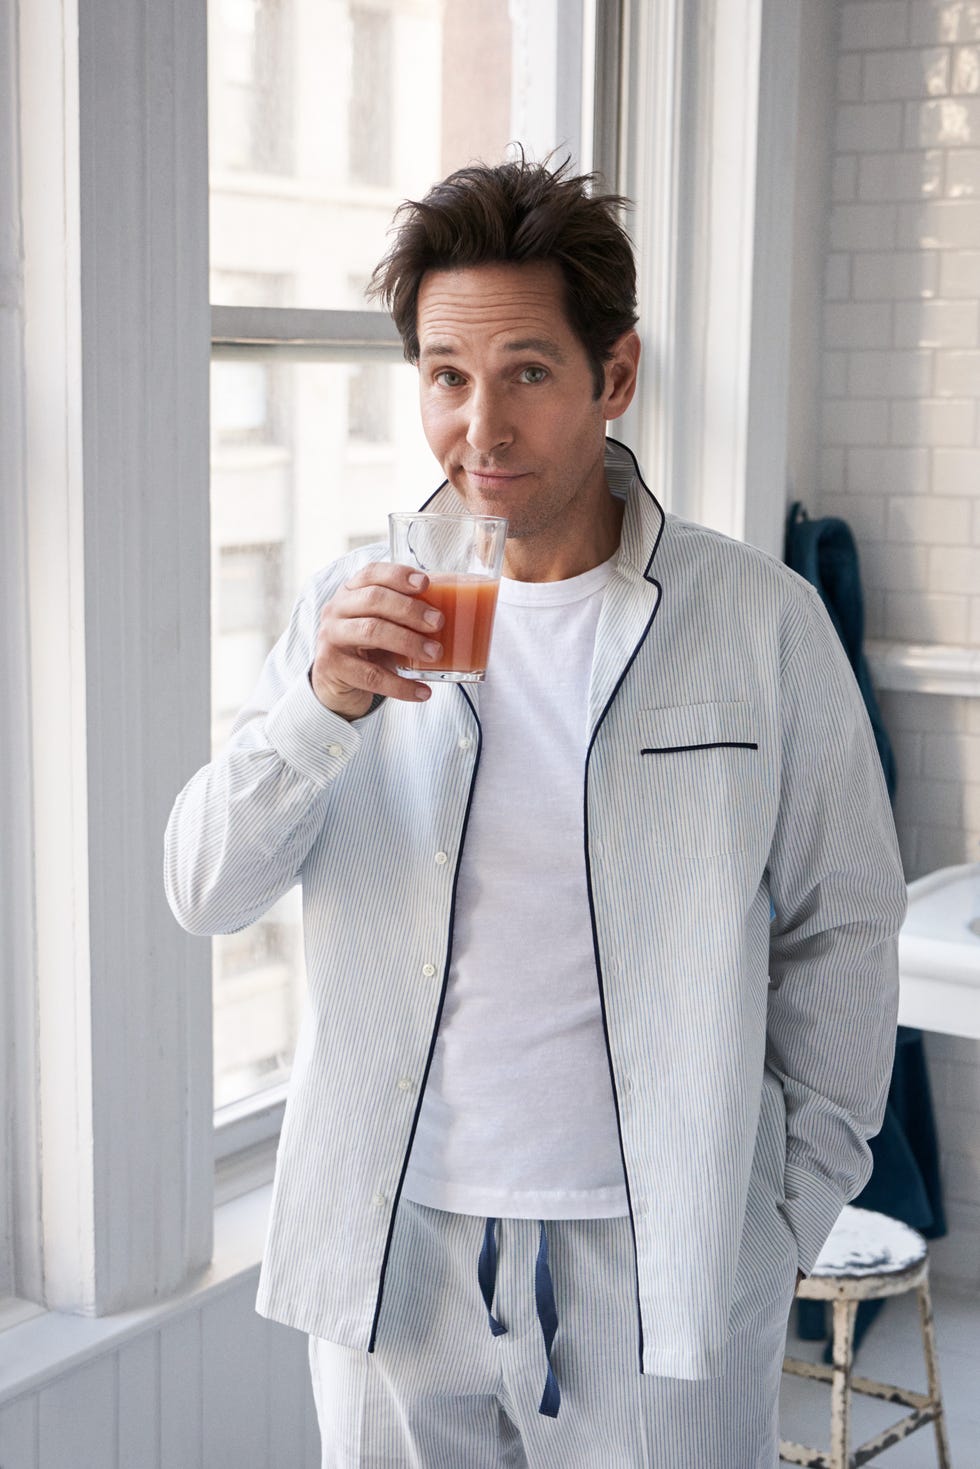 Paul Rudd Says His Kids Don't Care That He's Ant-Man